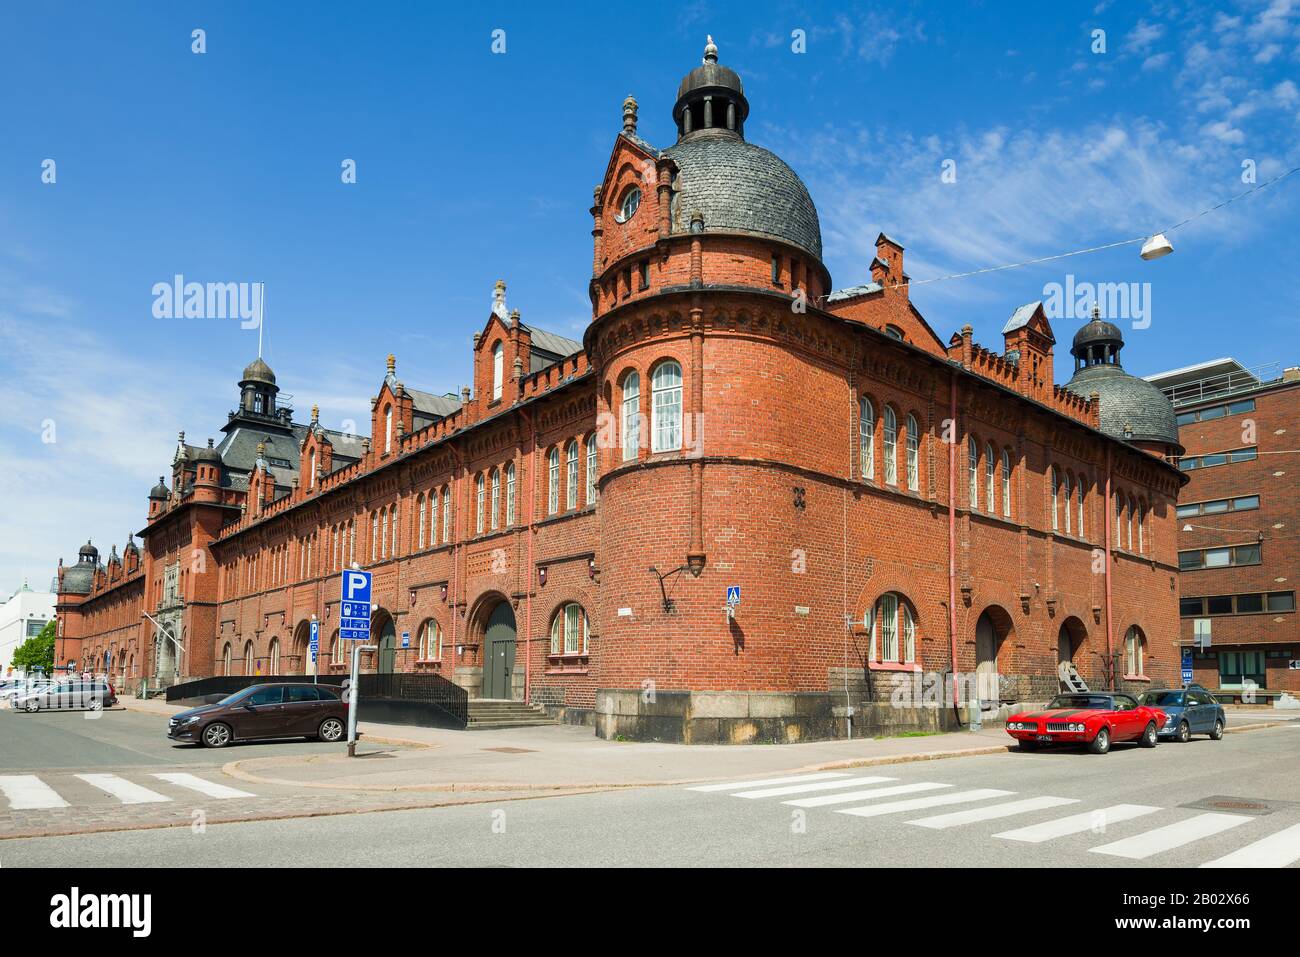 HELSINKI, FINLAND - JUNE 11, 2017: Ancient Jugend-style customs and pacehouse building sunny June afternoon Katayanokka Island Stock Photo